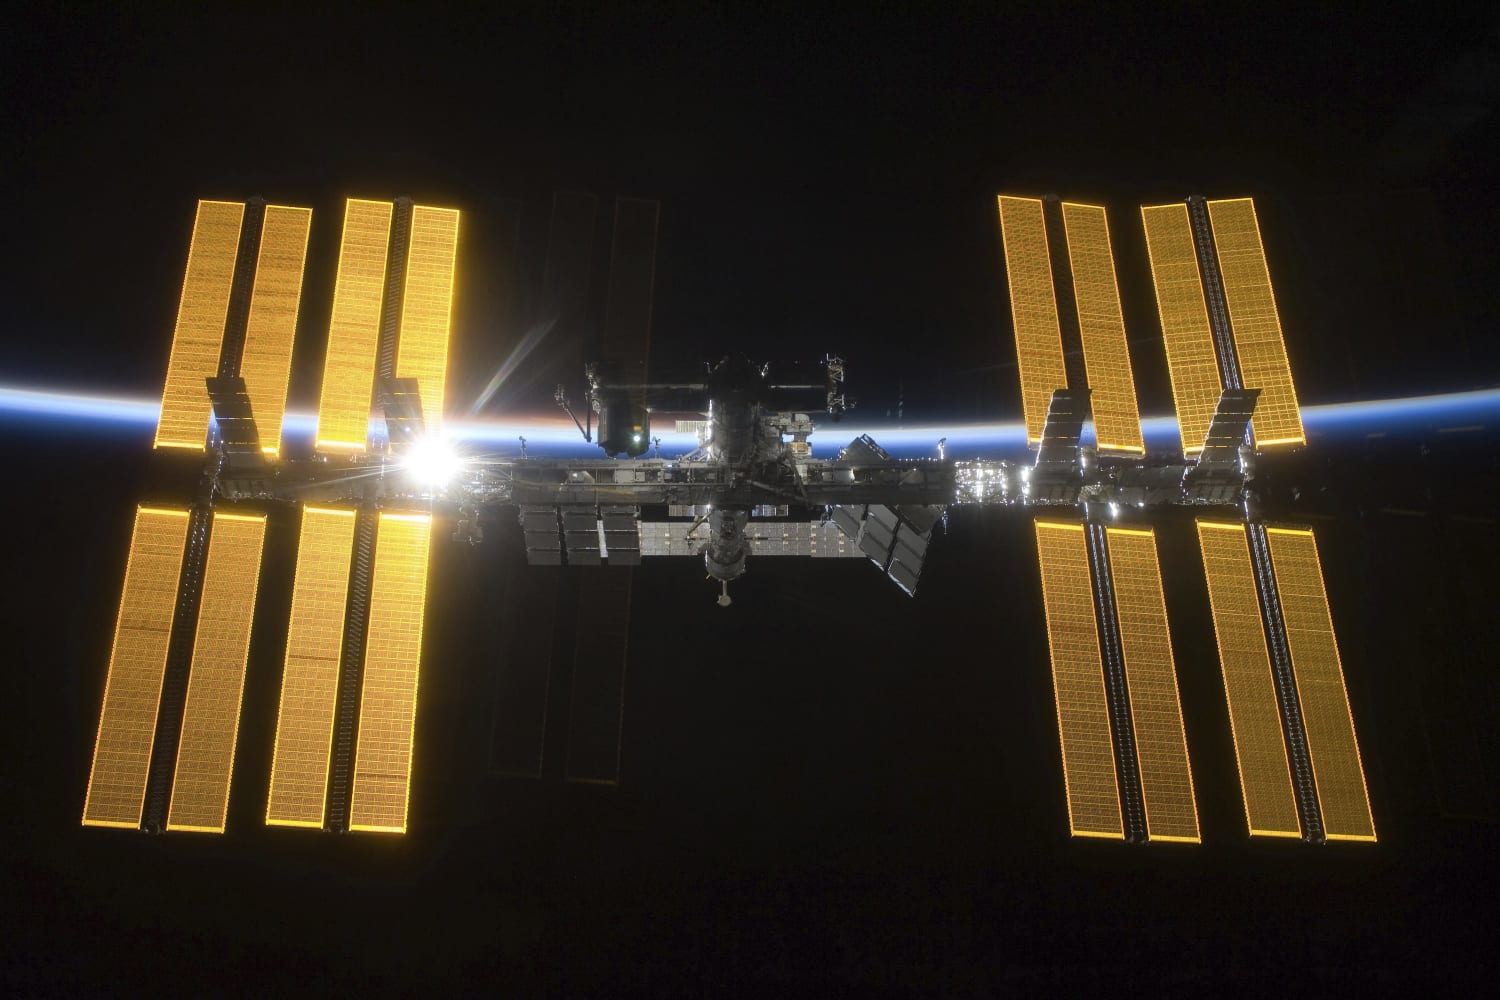 Long-distance trip: NASA opening space station to visitors